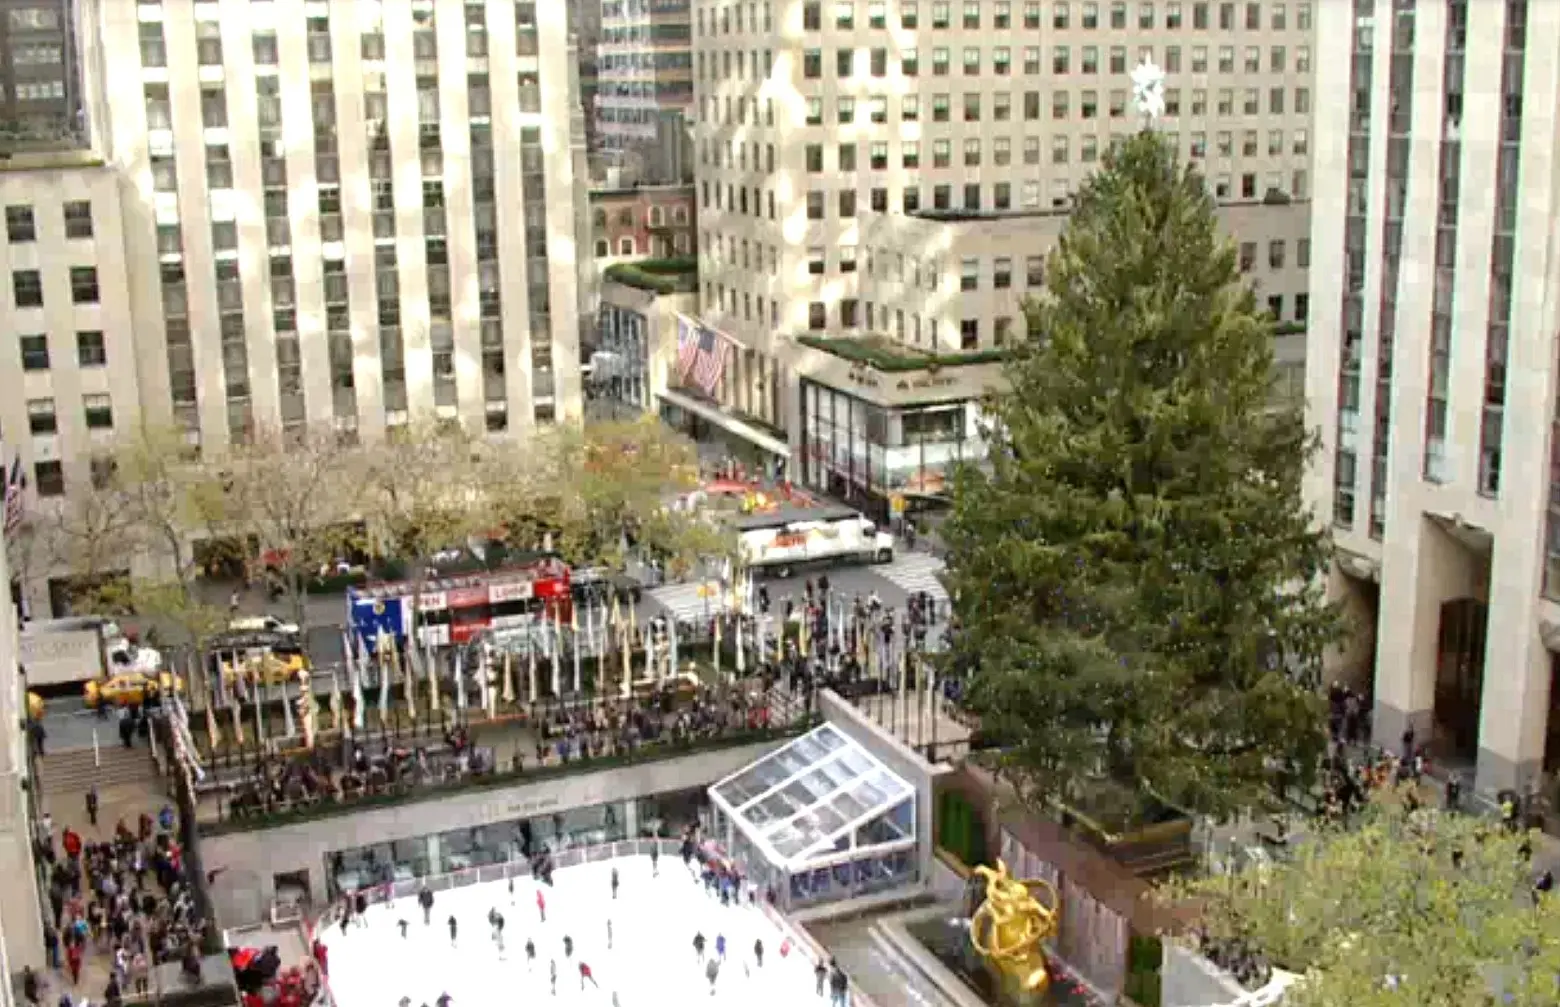 Watch a live feed of the Rockefeller Center Christmas Tree; new Union Square Cafe opens next week